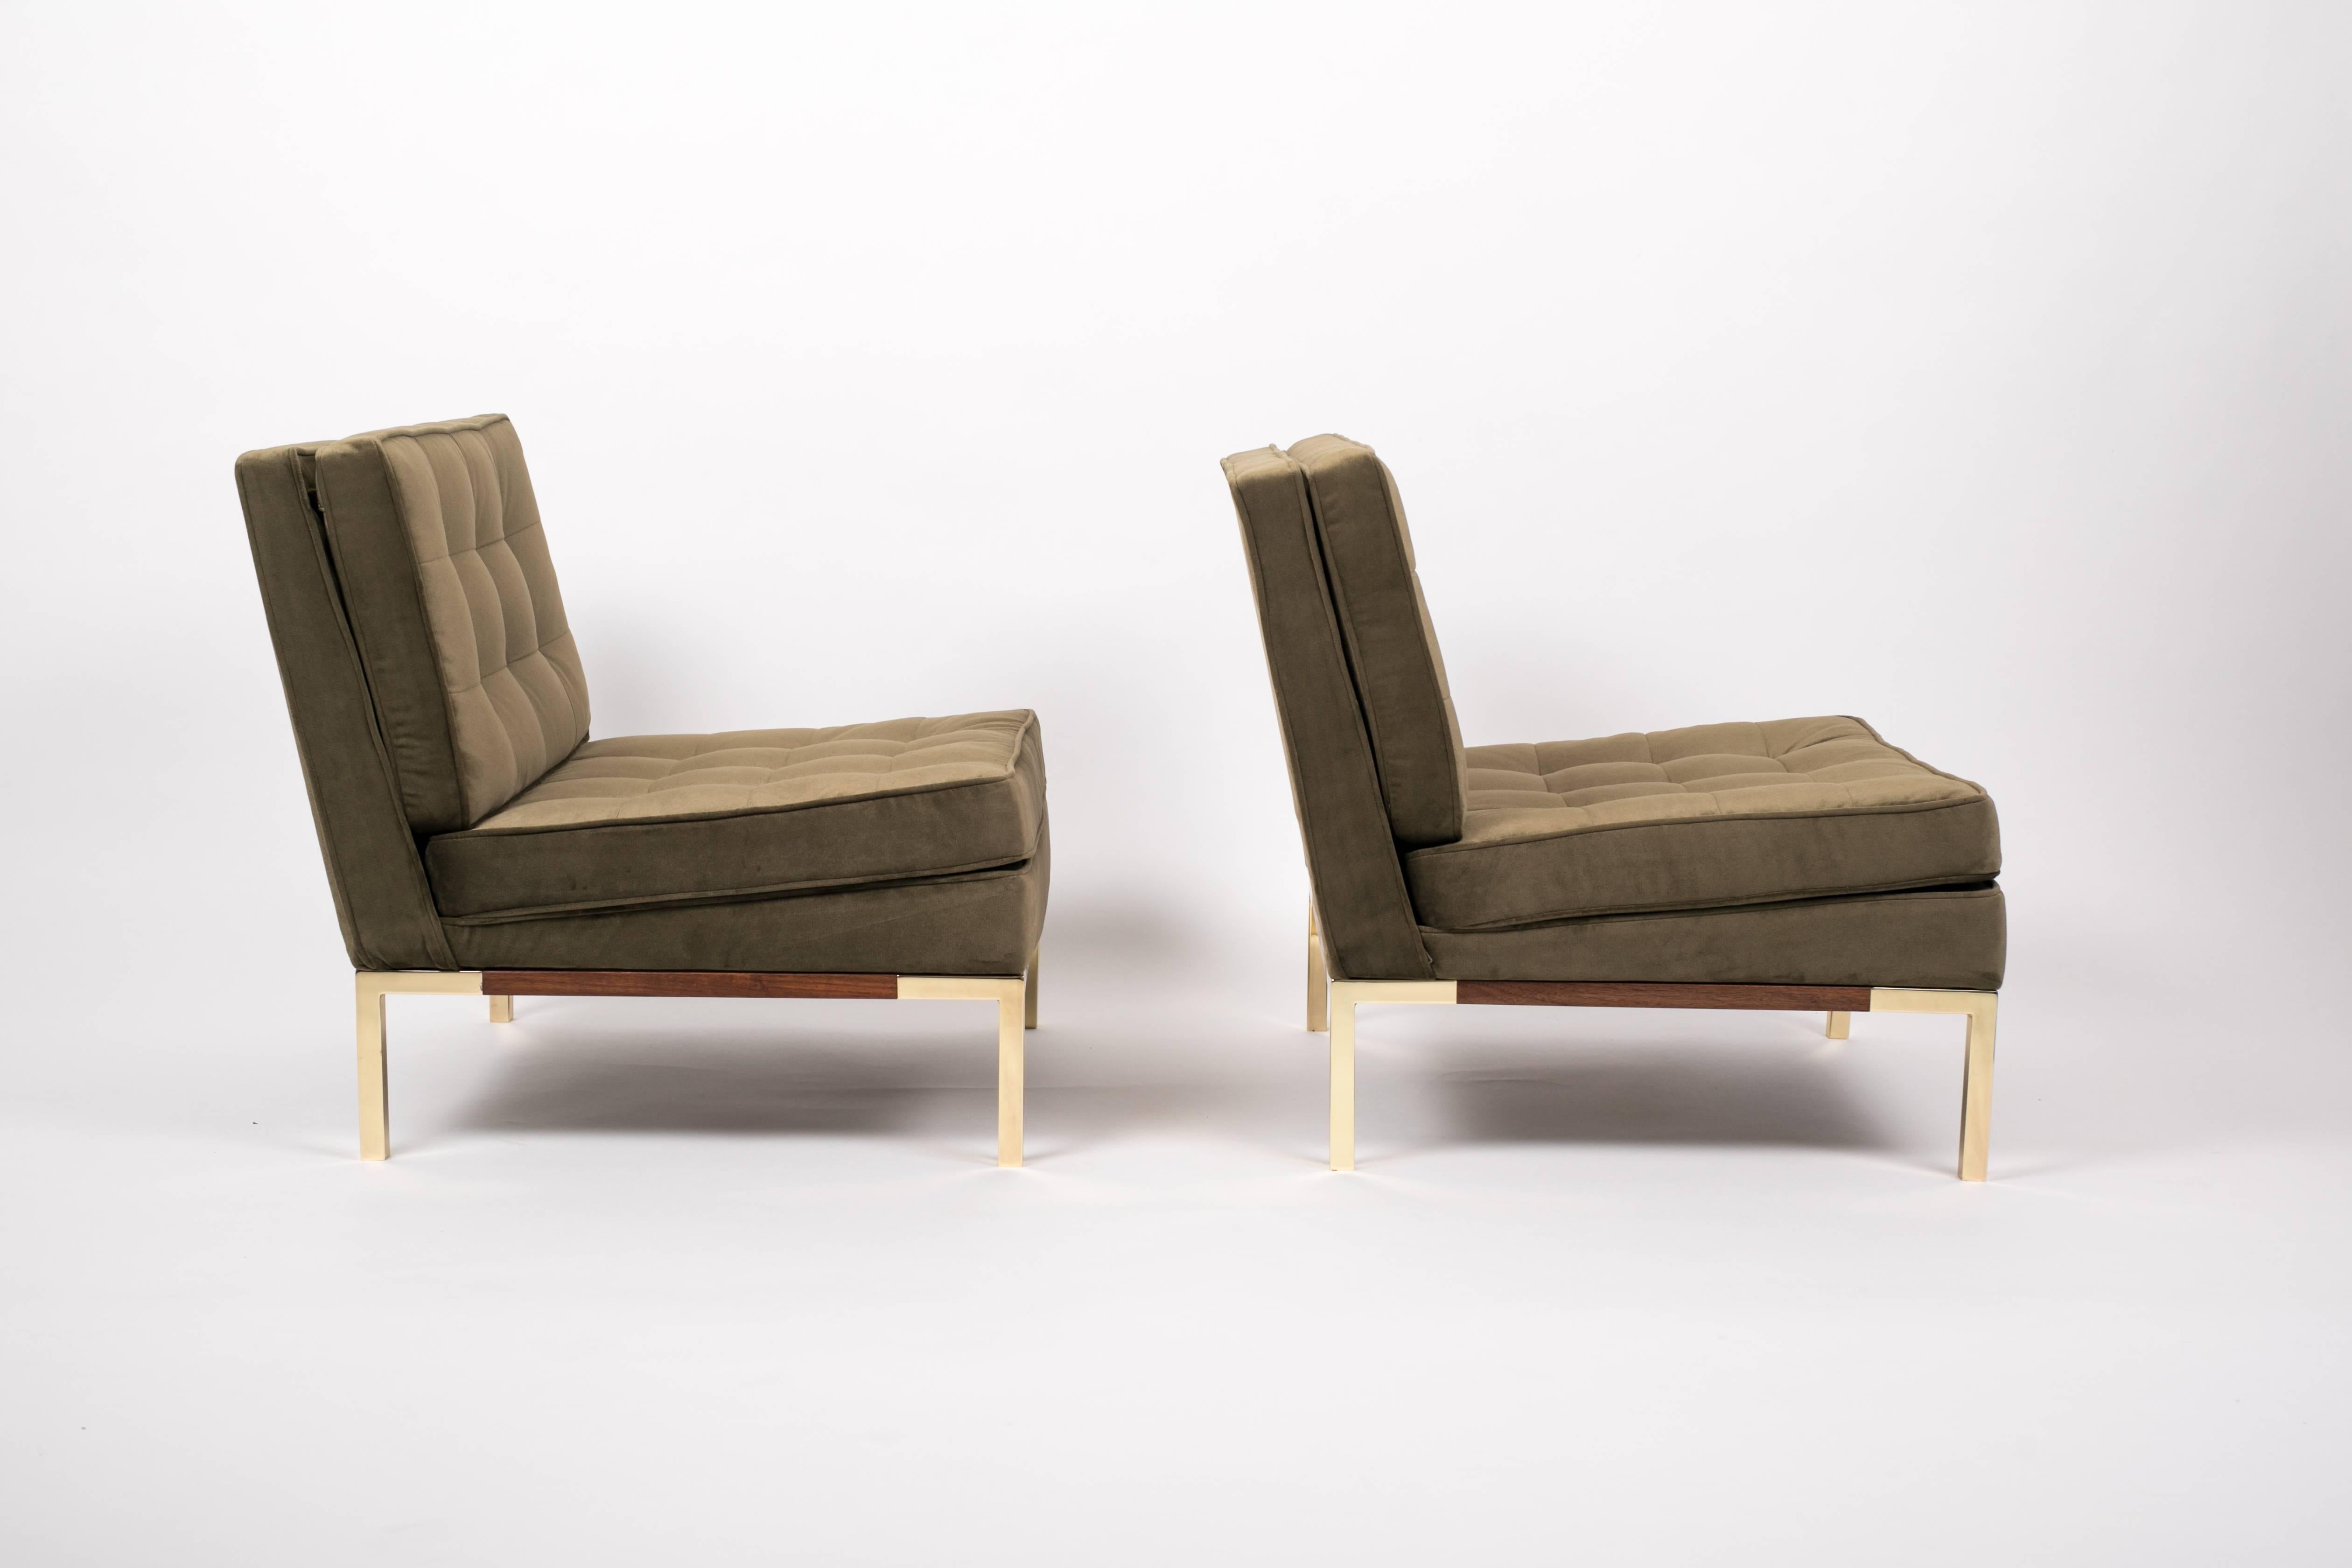 A pair of fully restored slipper or lounge chairs by Lee Woodard for Woodard Furniture. The olive green velvet upholstery is quilted according to the original design and welted corners emphasize the structured design. The chairs sit on a walnut base